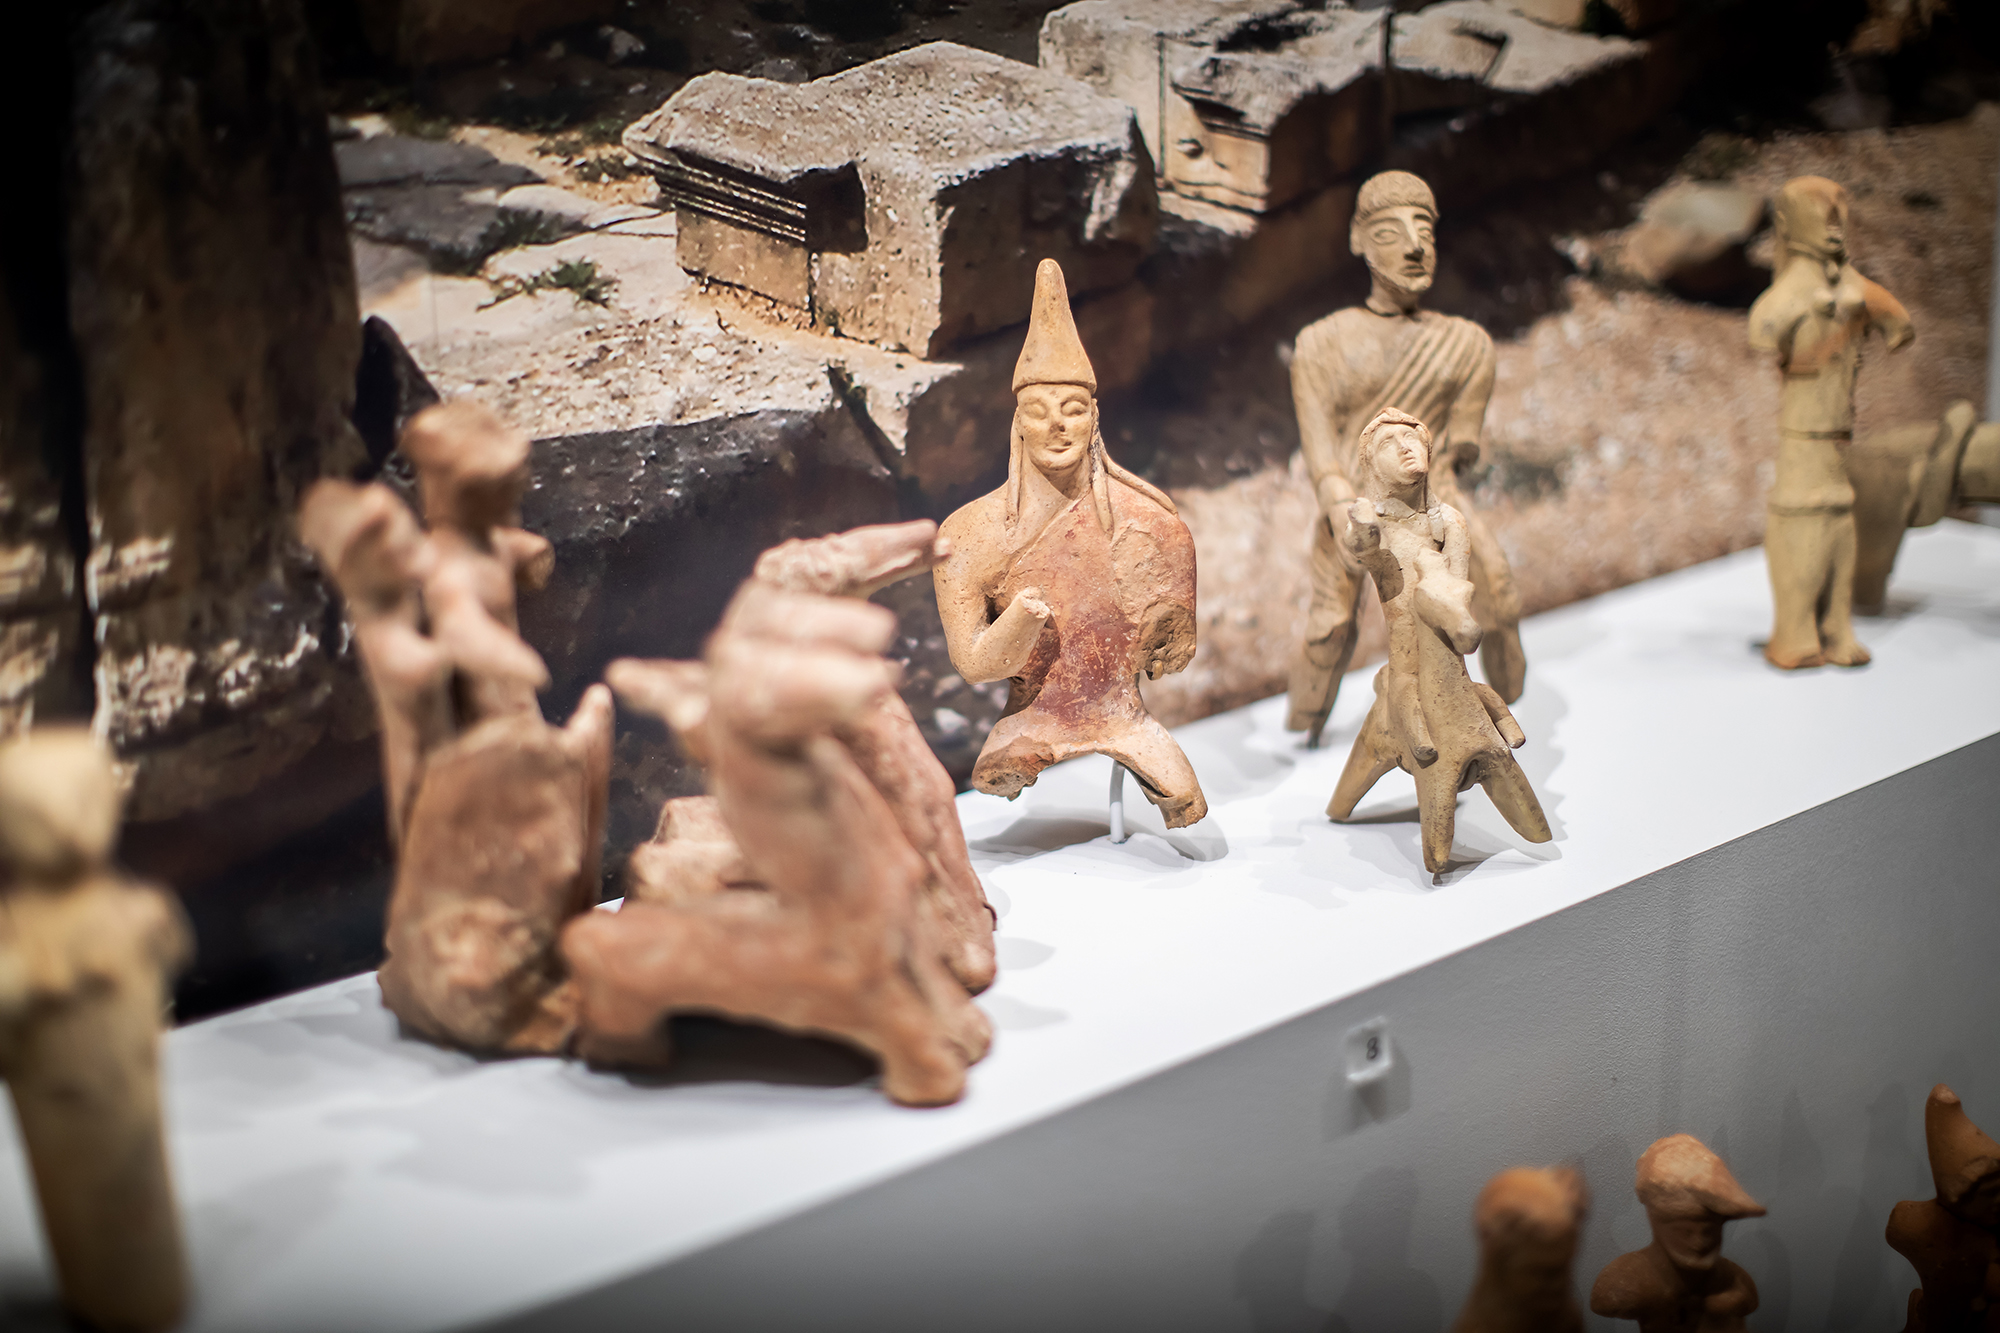 several figurines made of clay